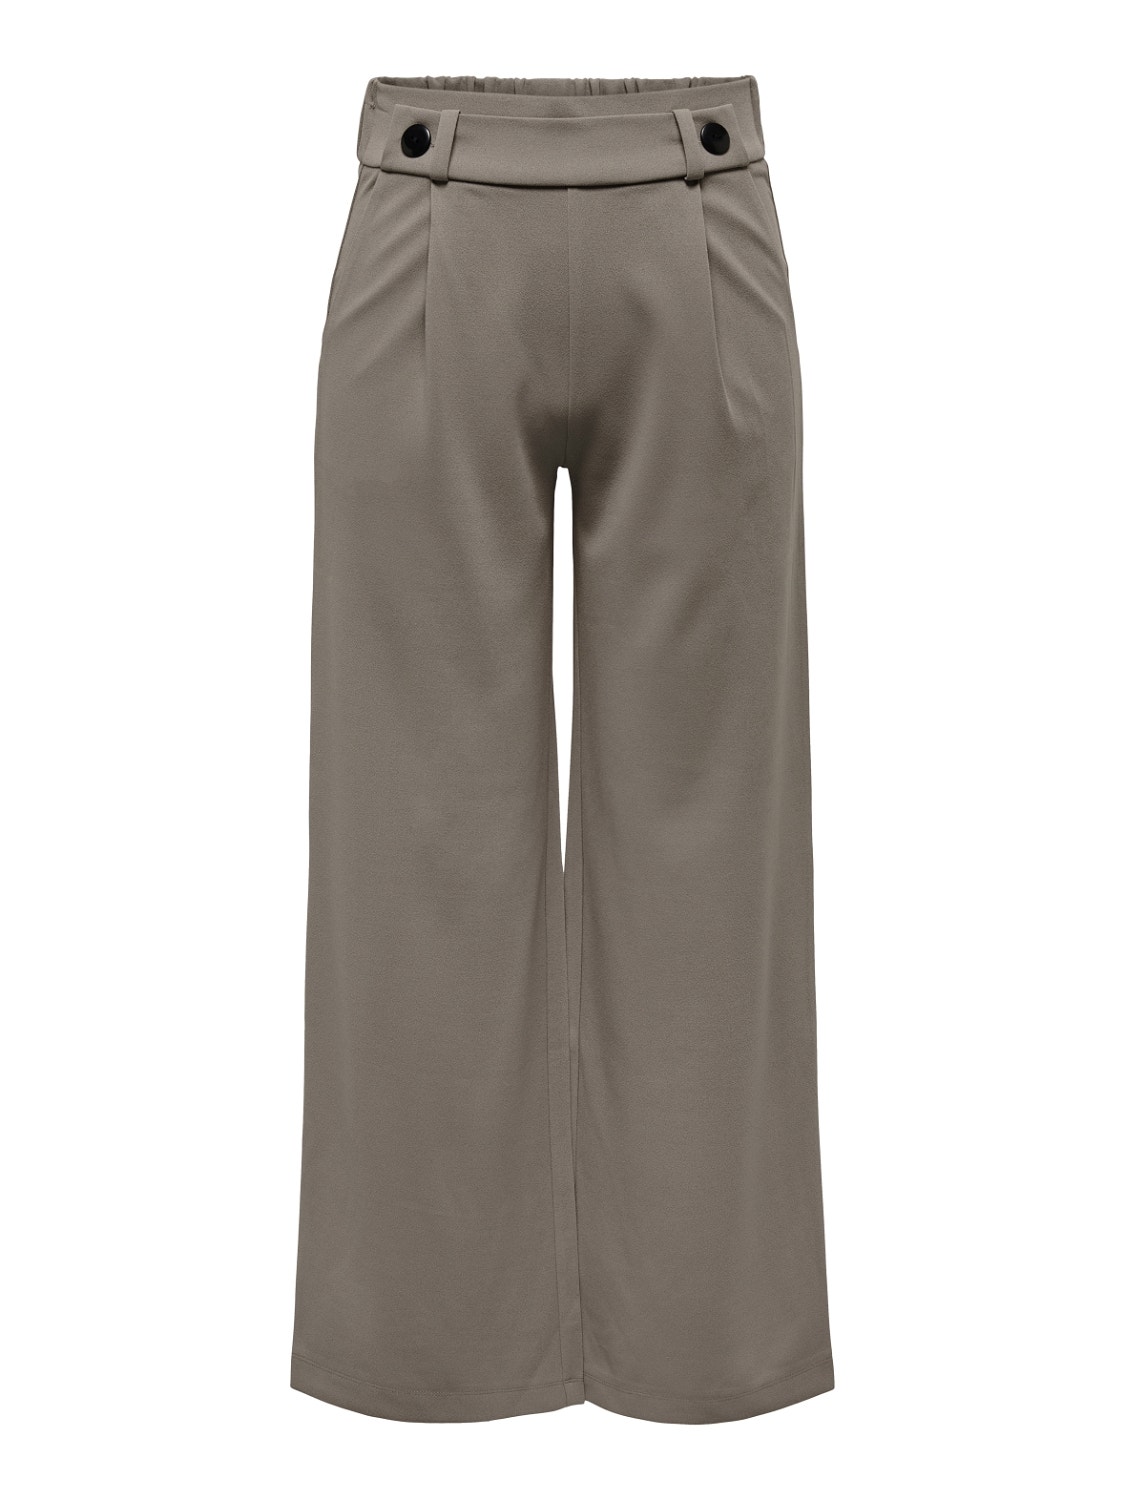 ONLY Wide Leg Fit Mid waist Trousers -Driftwood - 15208430